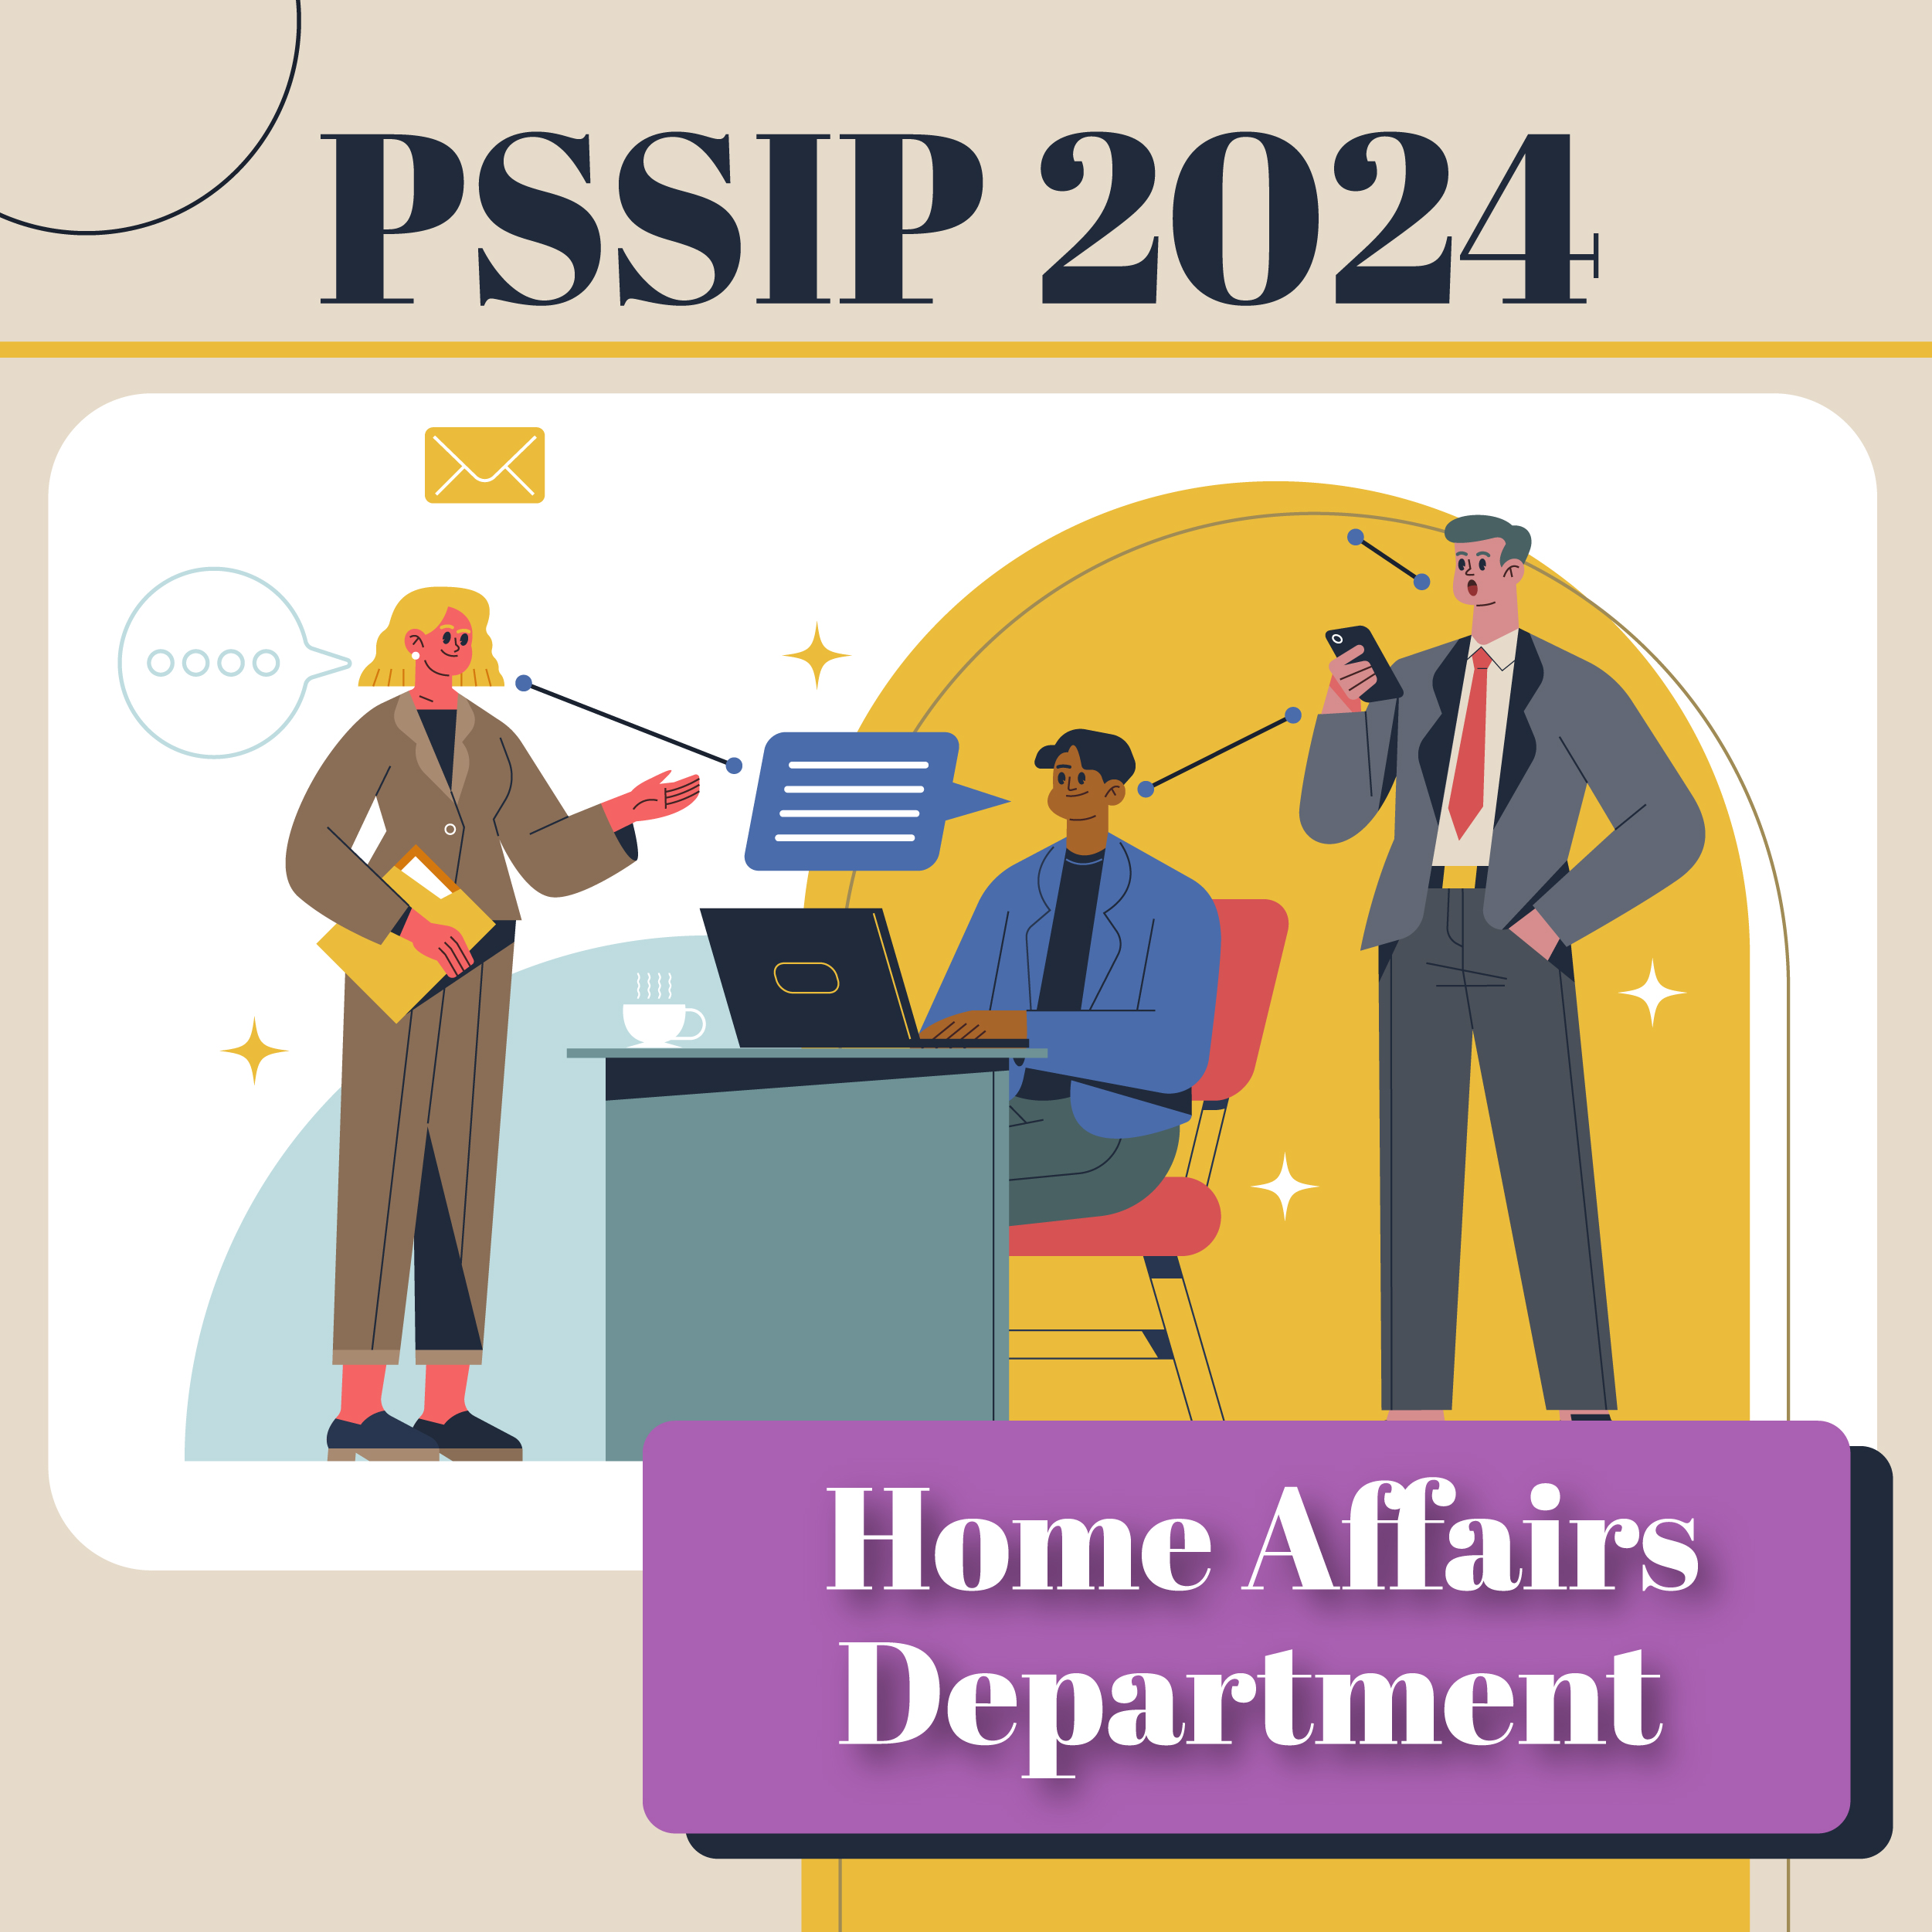 PSSIP2024 – Home Affairs Department